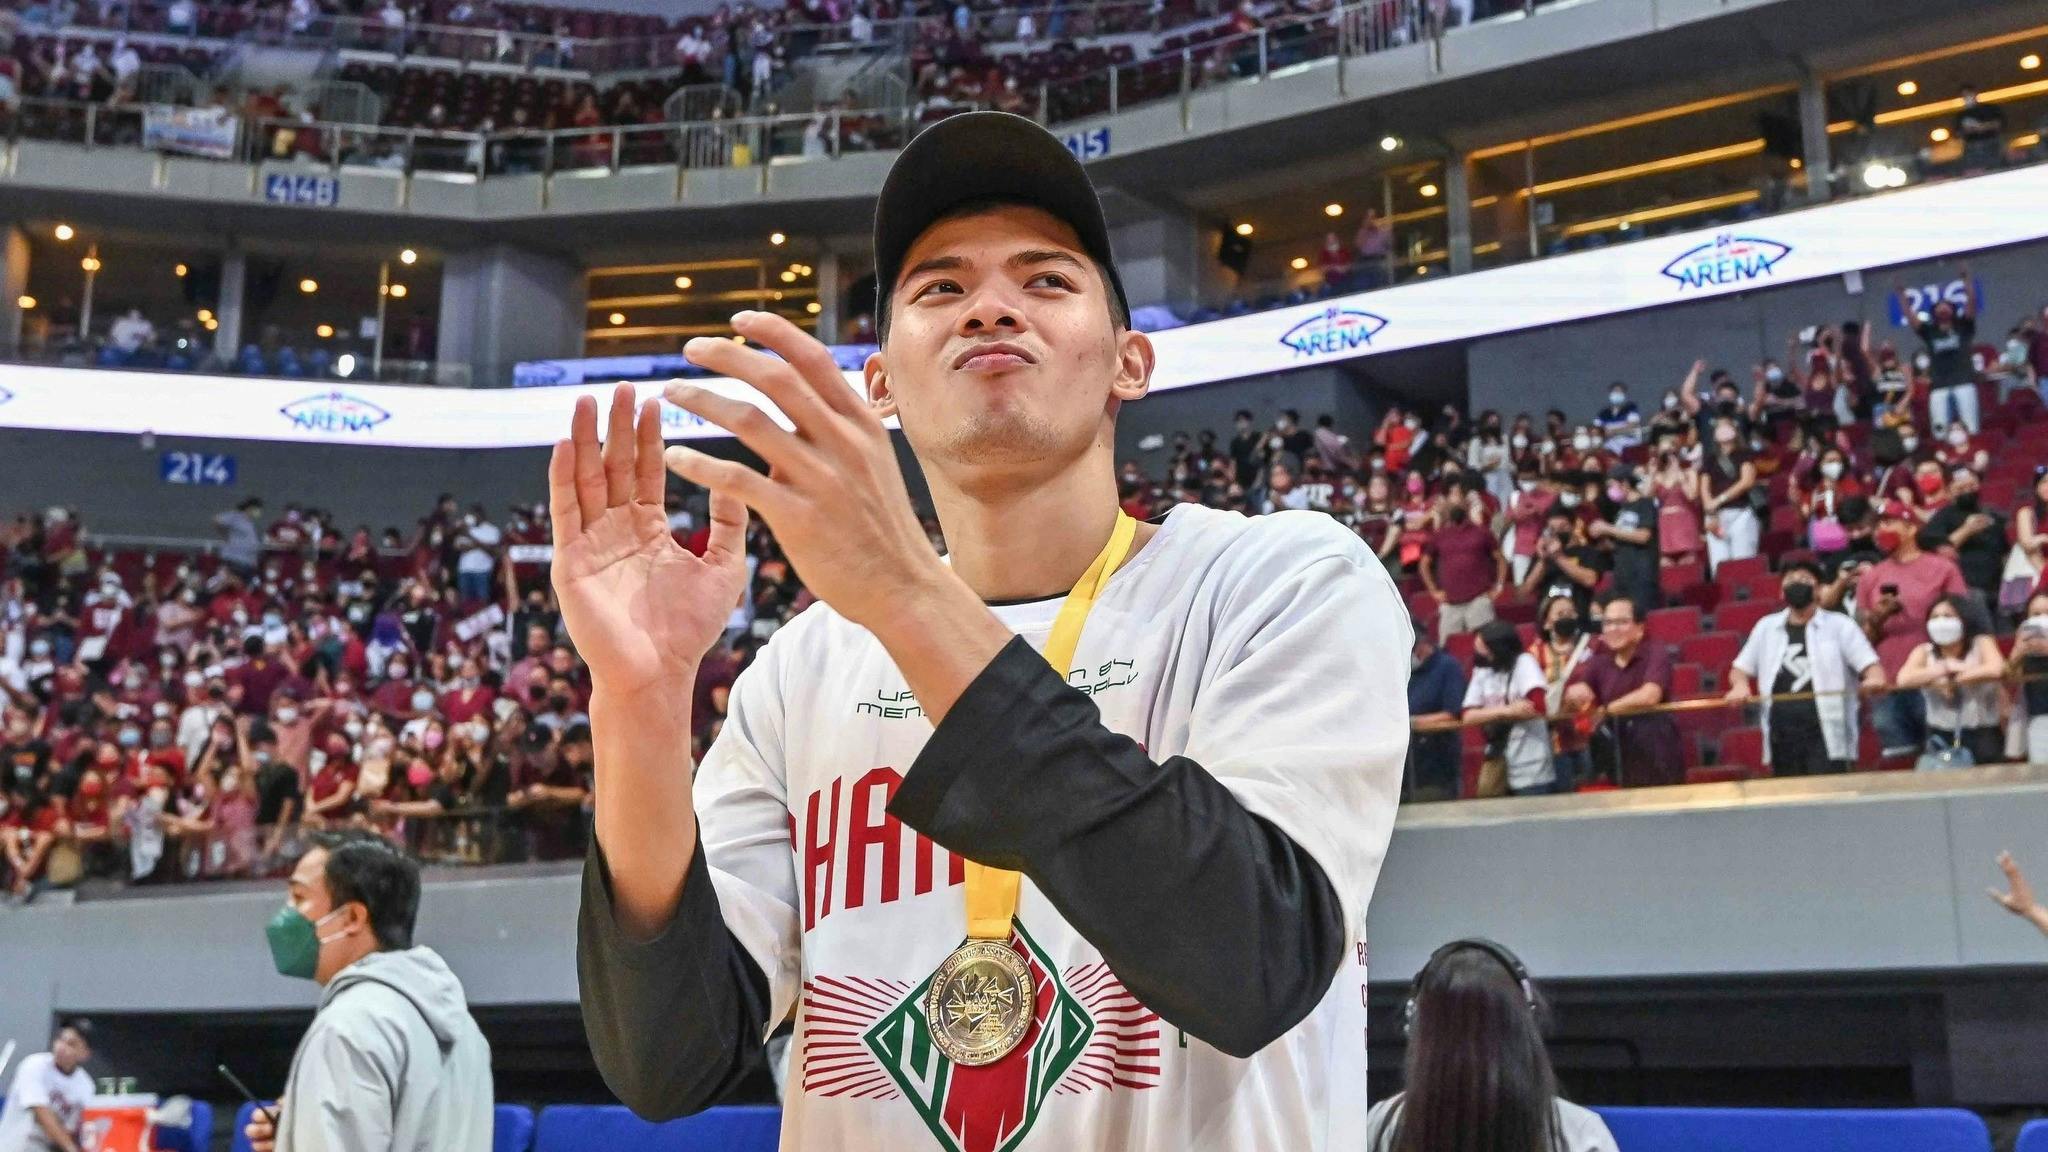 Bigger than basketball: UP’s CJ Cansino aiming for different impact after second ACL injury 